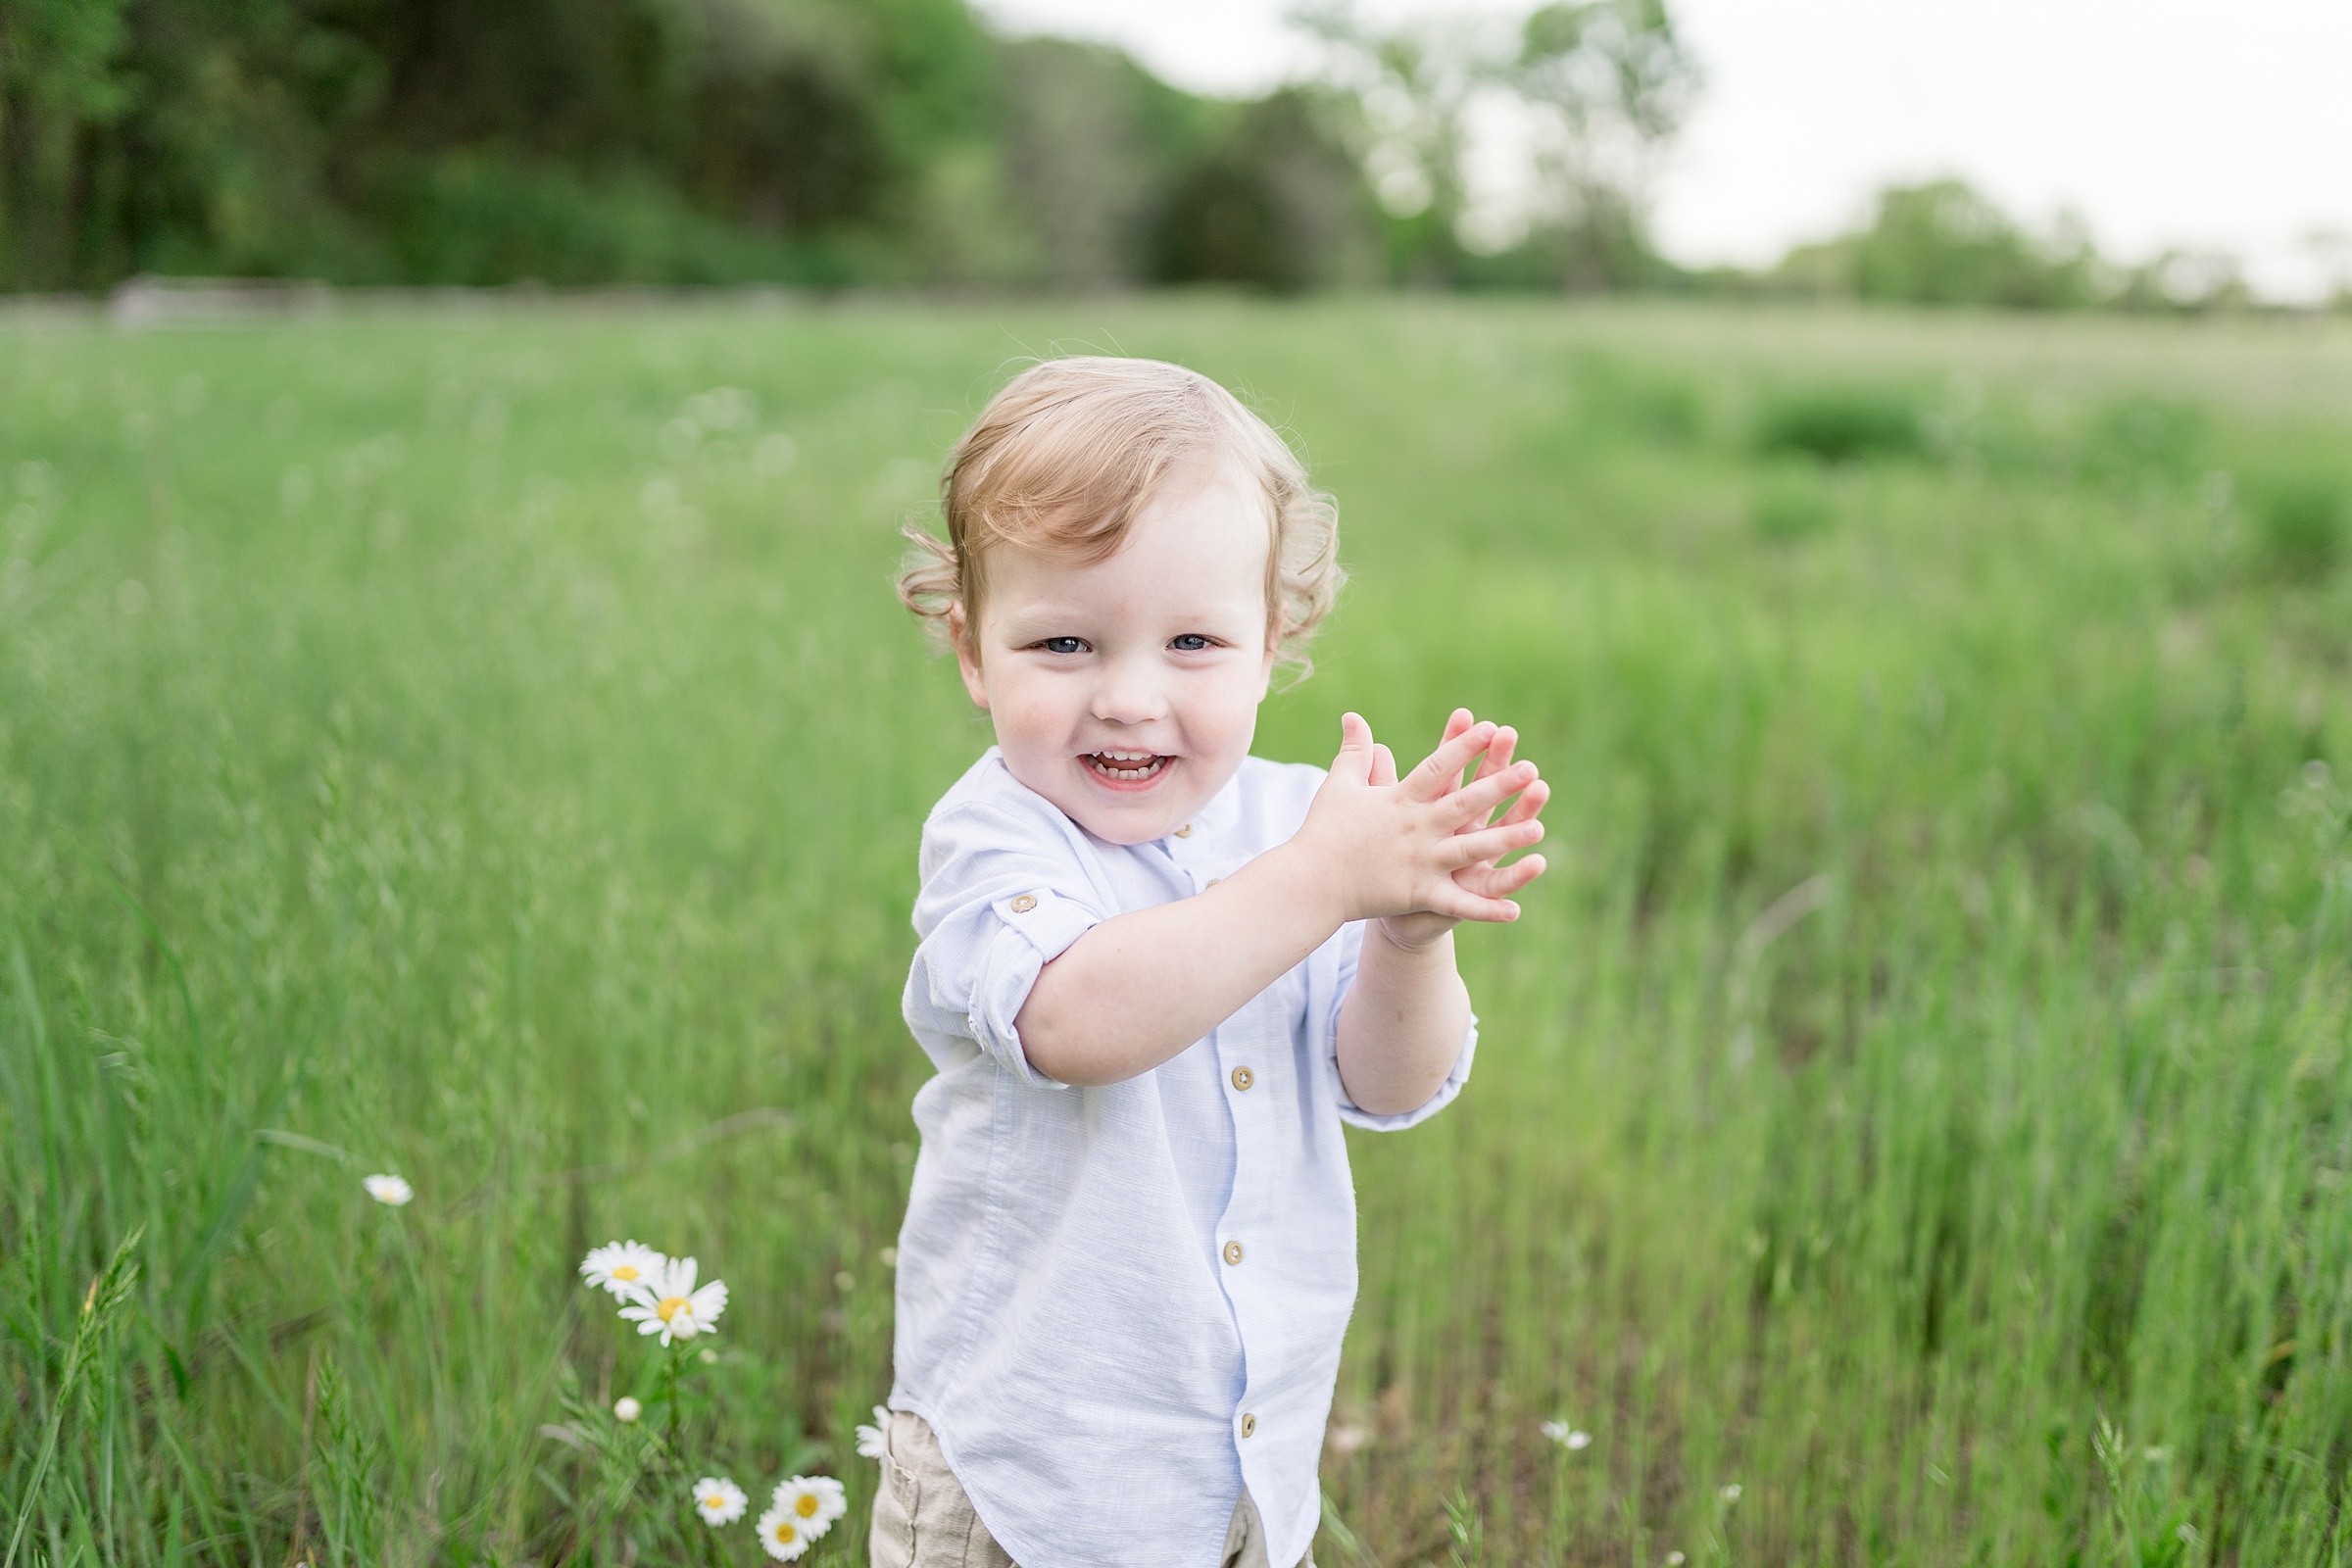 youngest son claps hands together during Murfreesboro TN Family Session